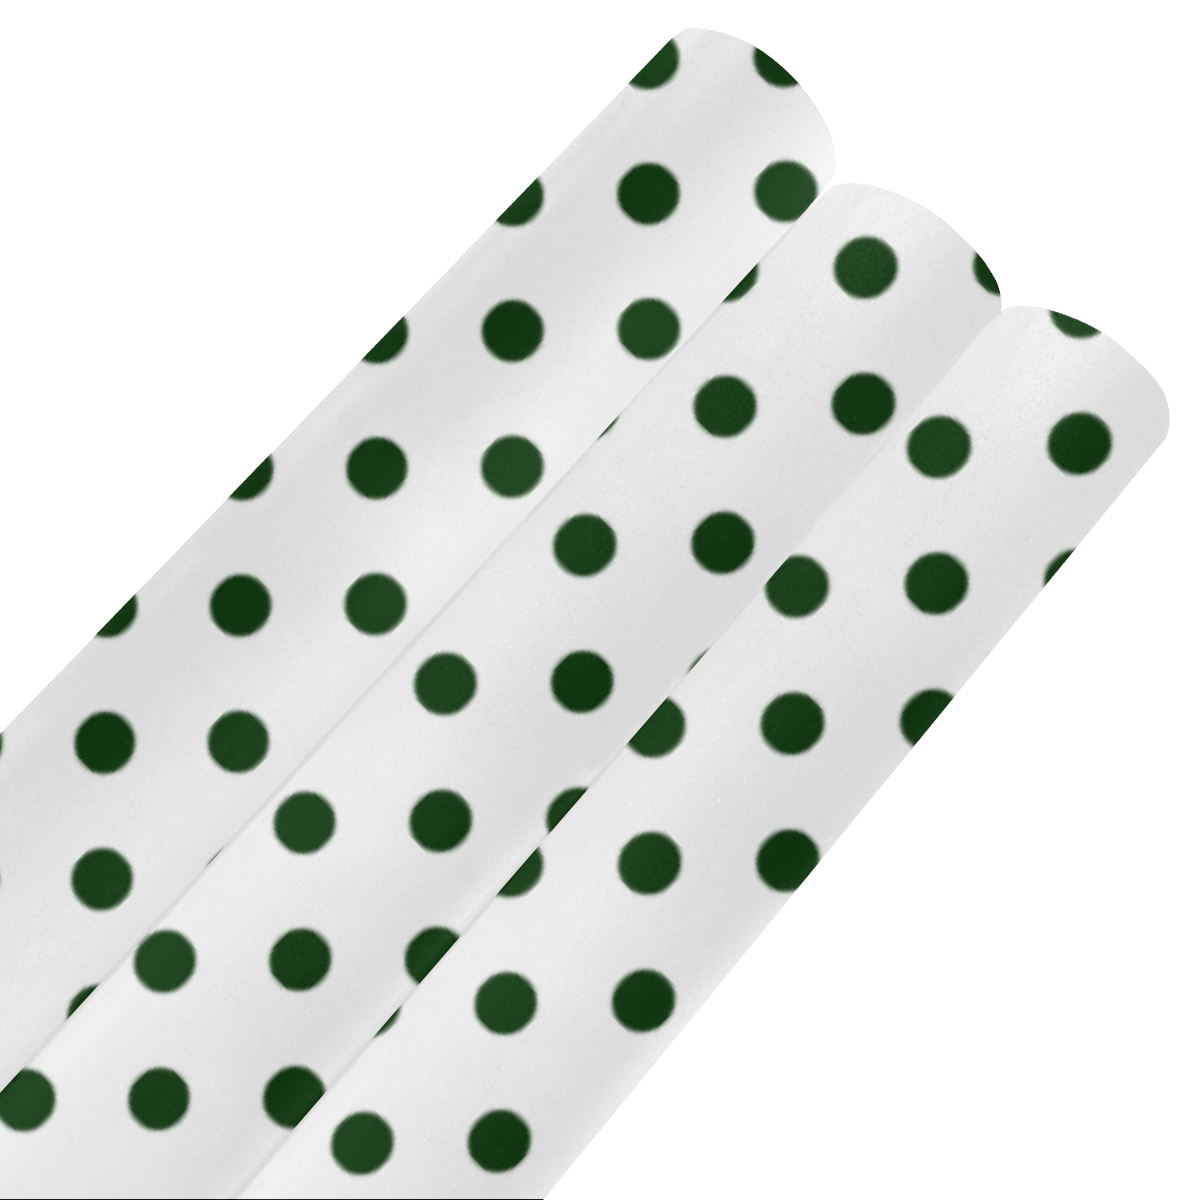 Dark Green Polka Dots on White Gift Wrapping Paper 58"x 23" (3 Rolls)